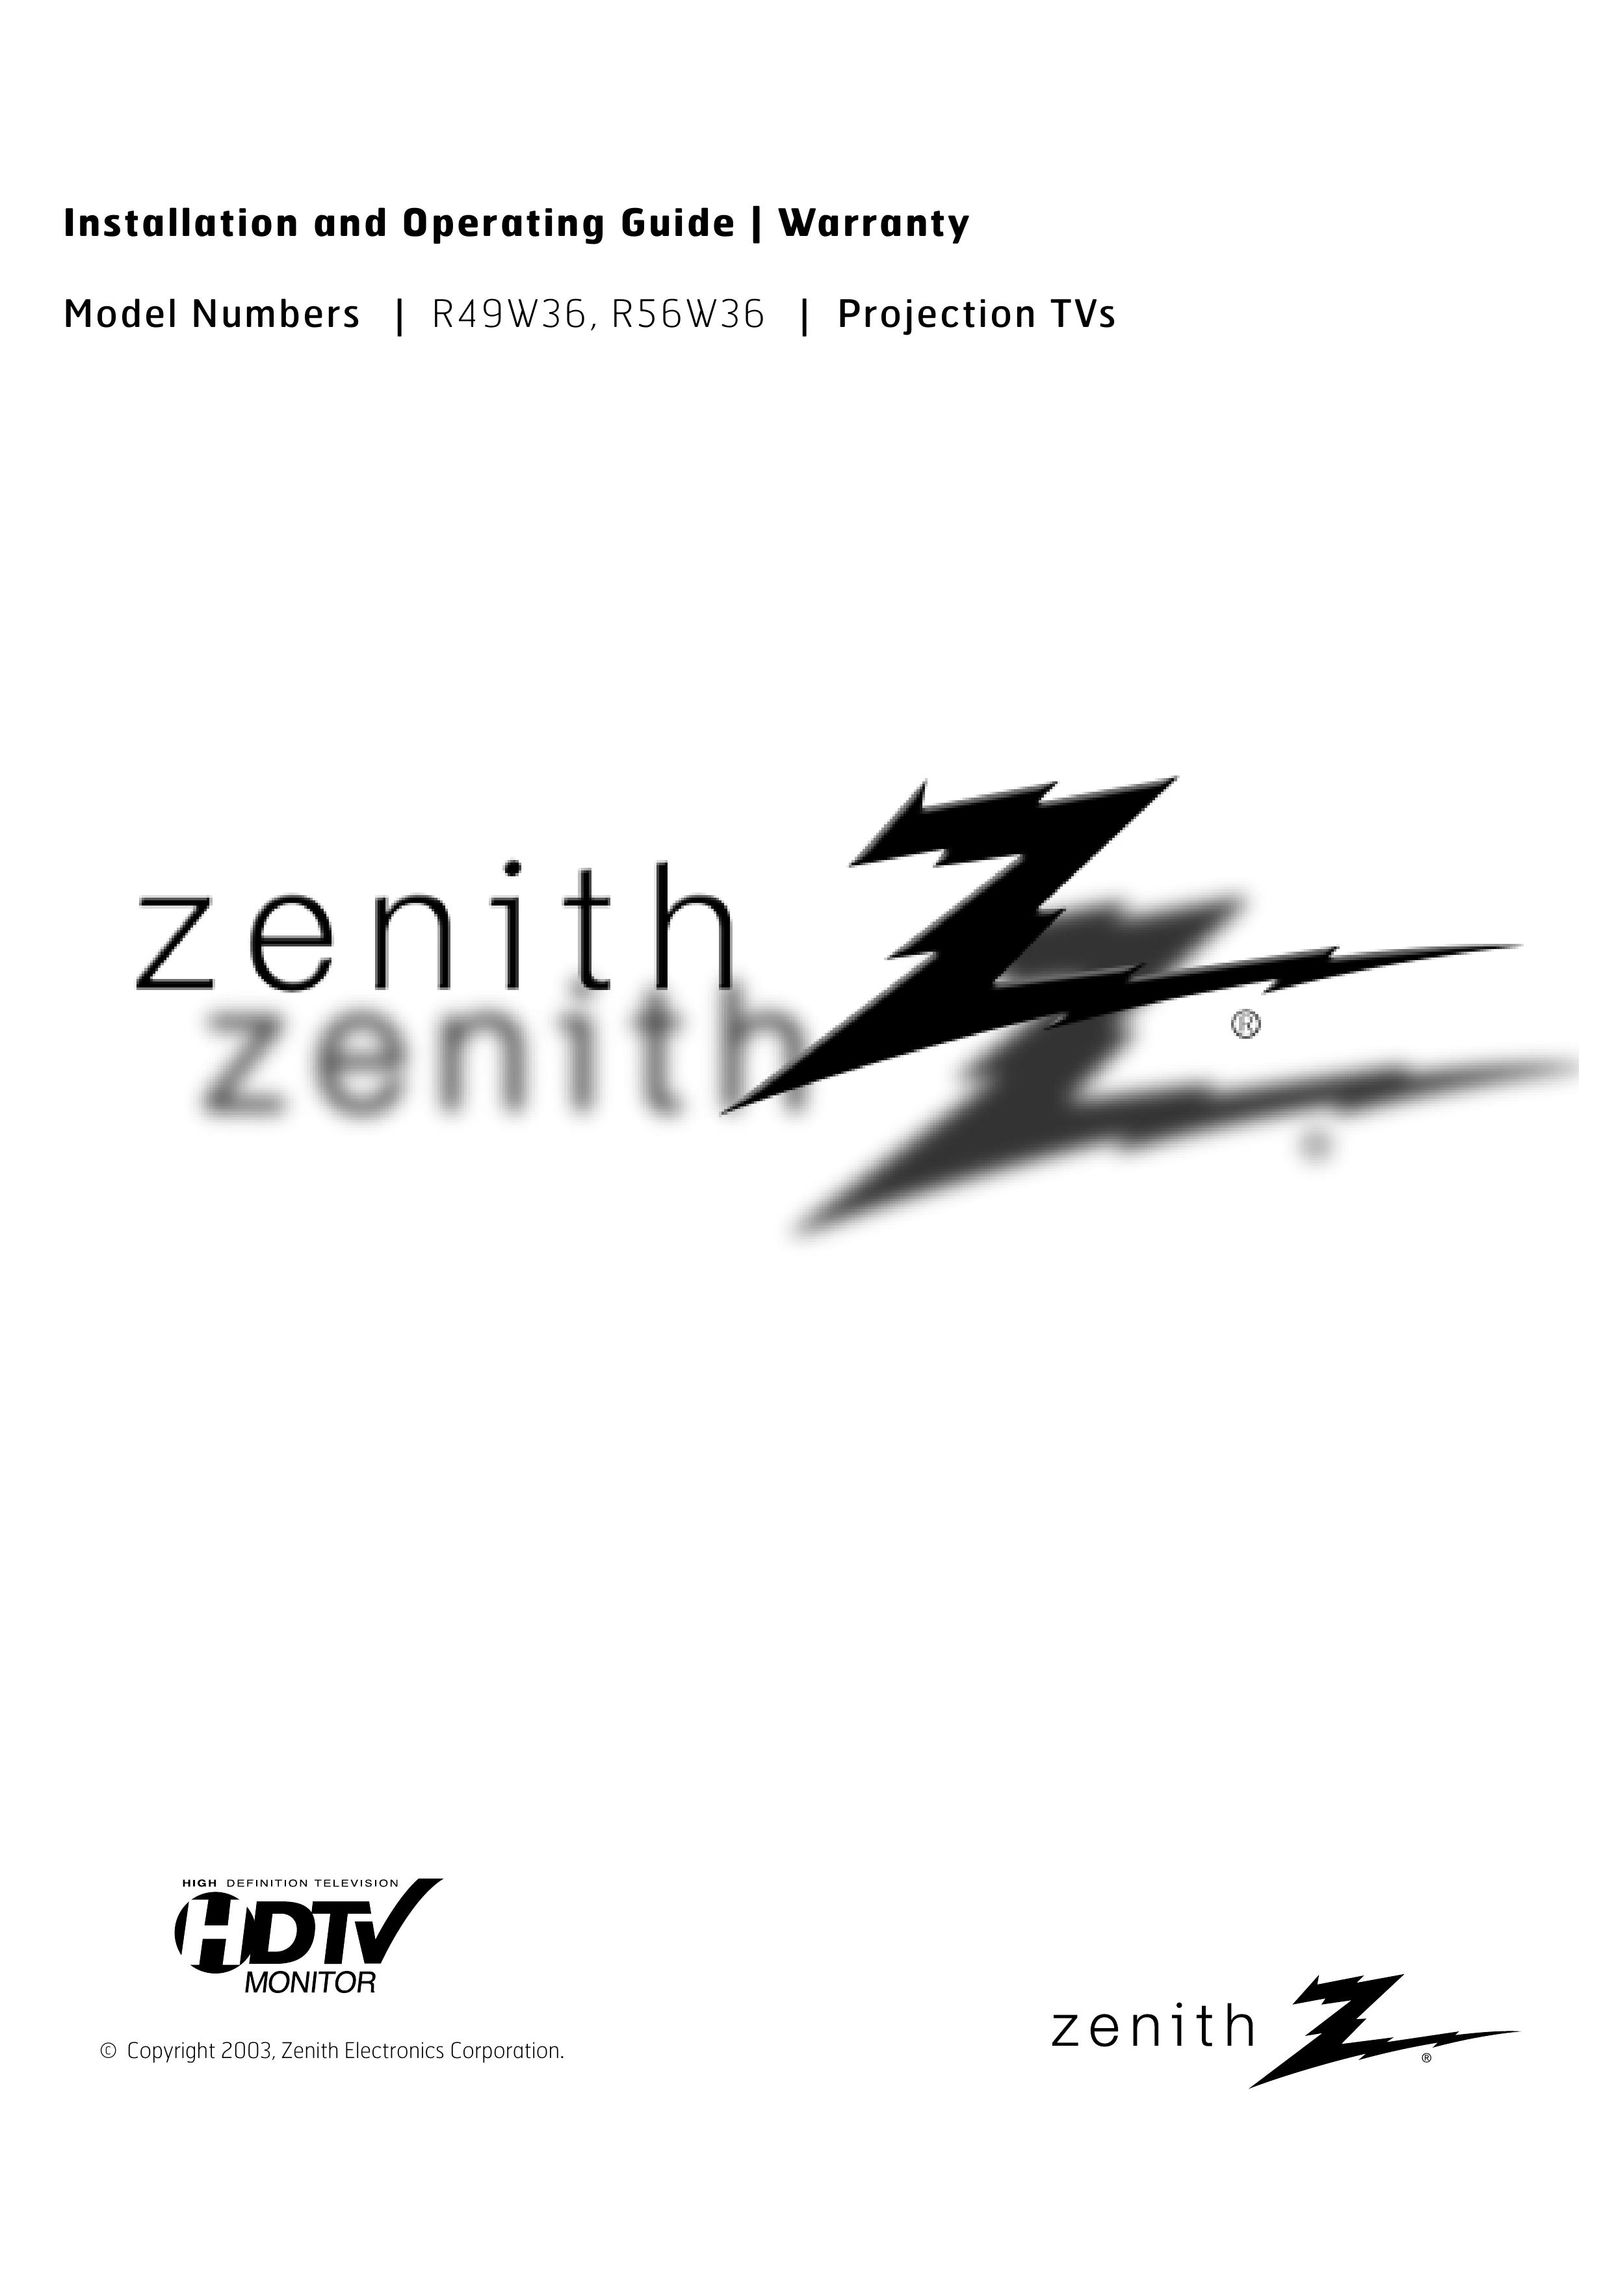 Zenith R56W36 Projection Television User Manual